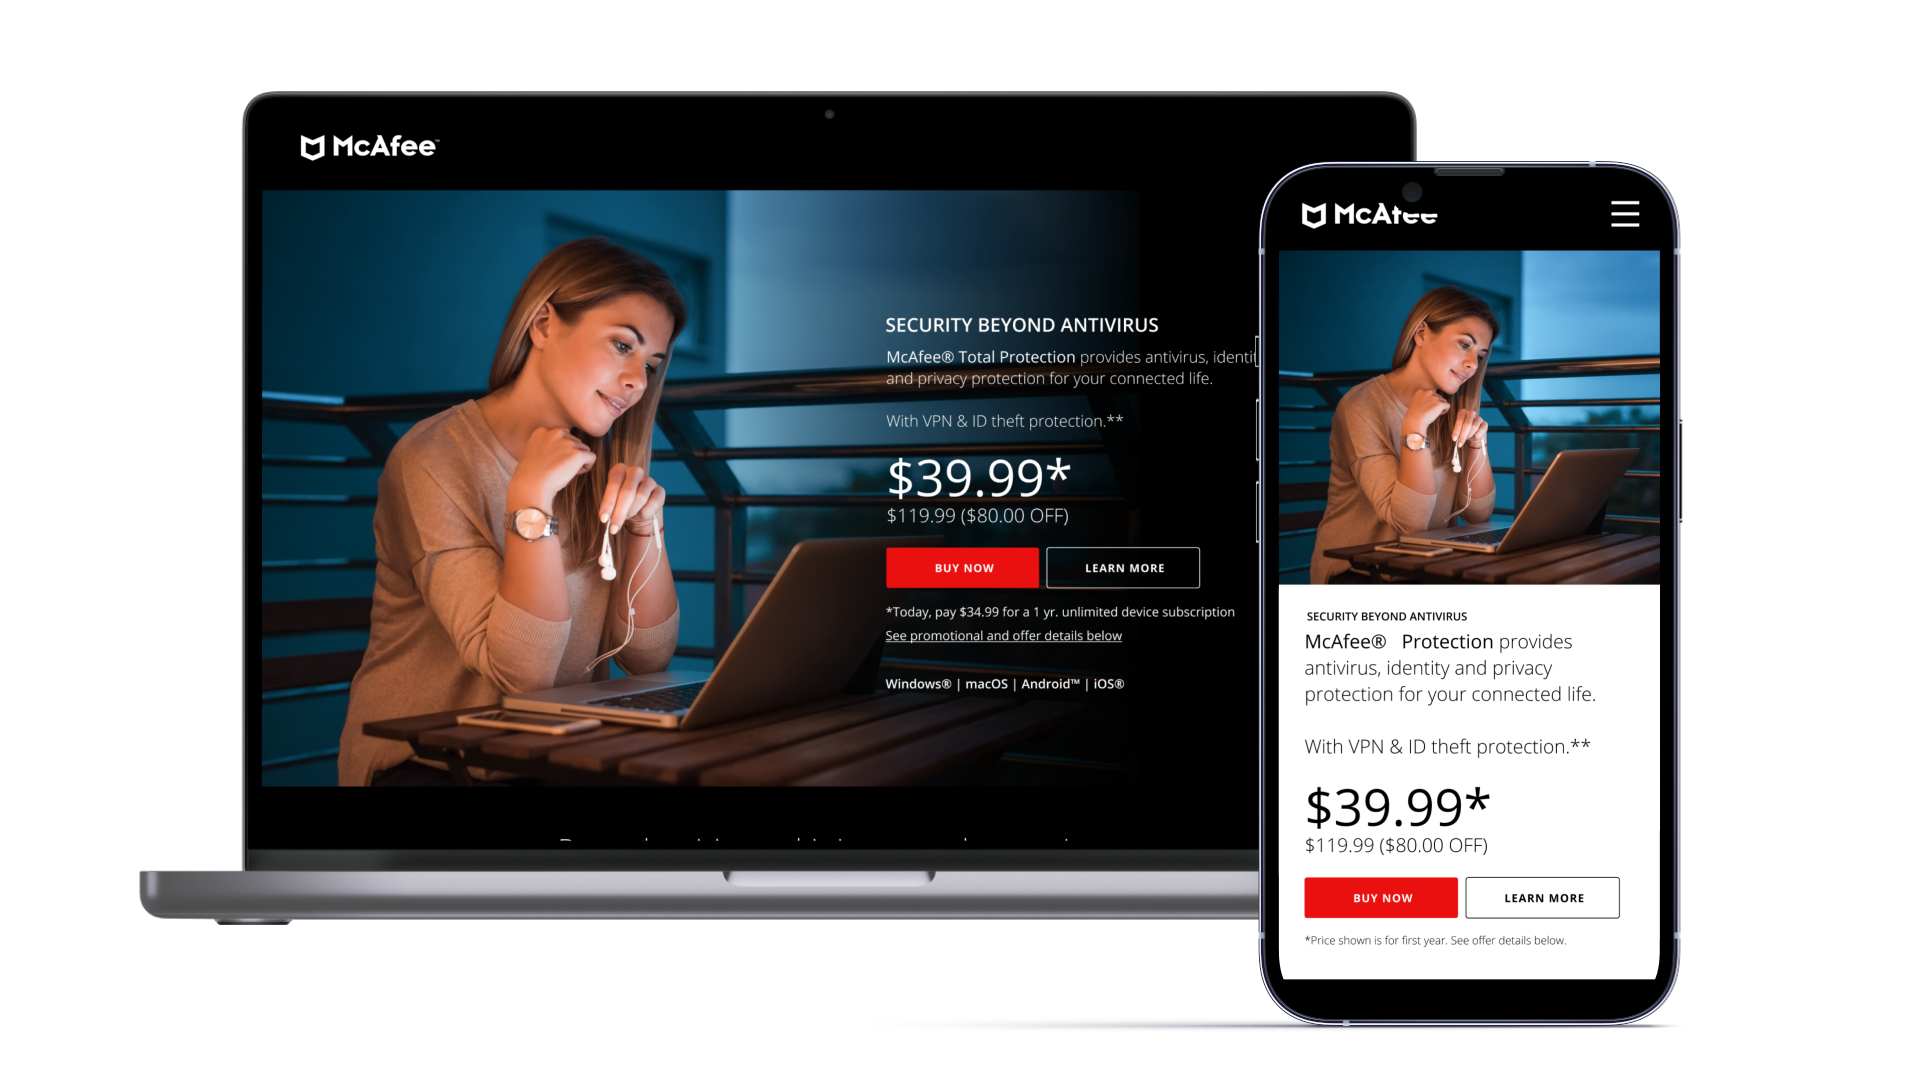 McAfee Product Page displayed on the desktop and mobile